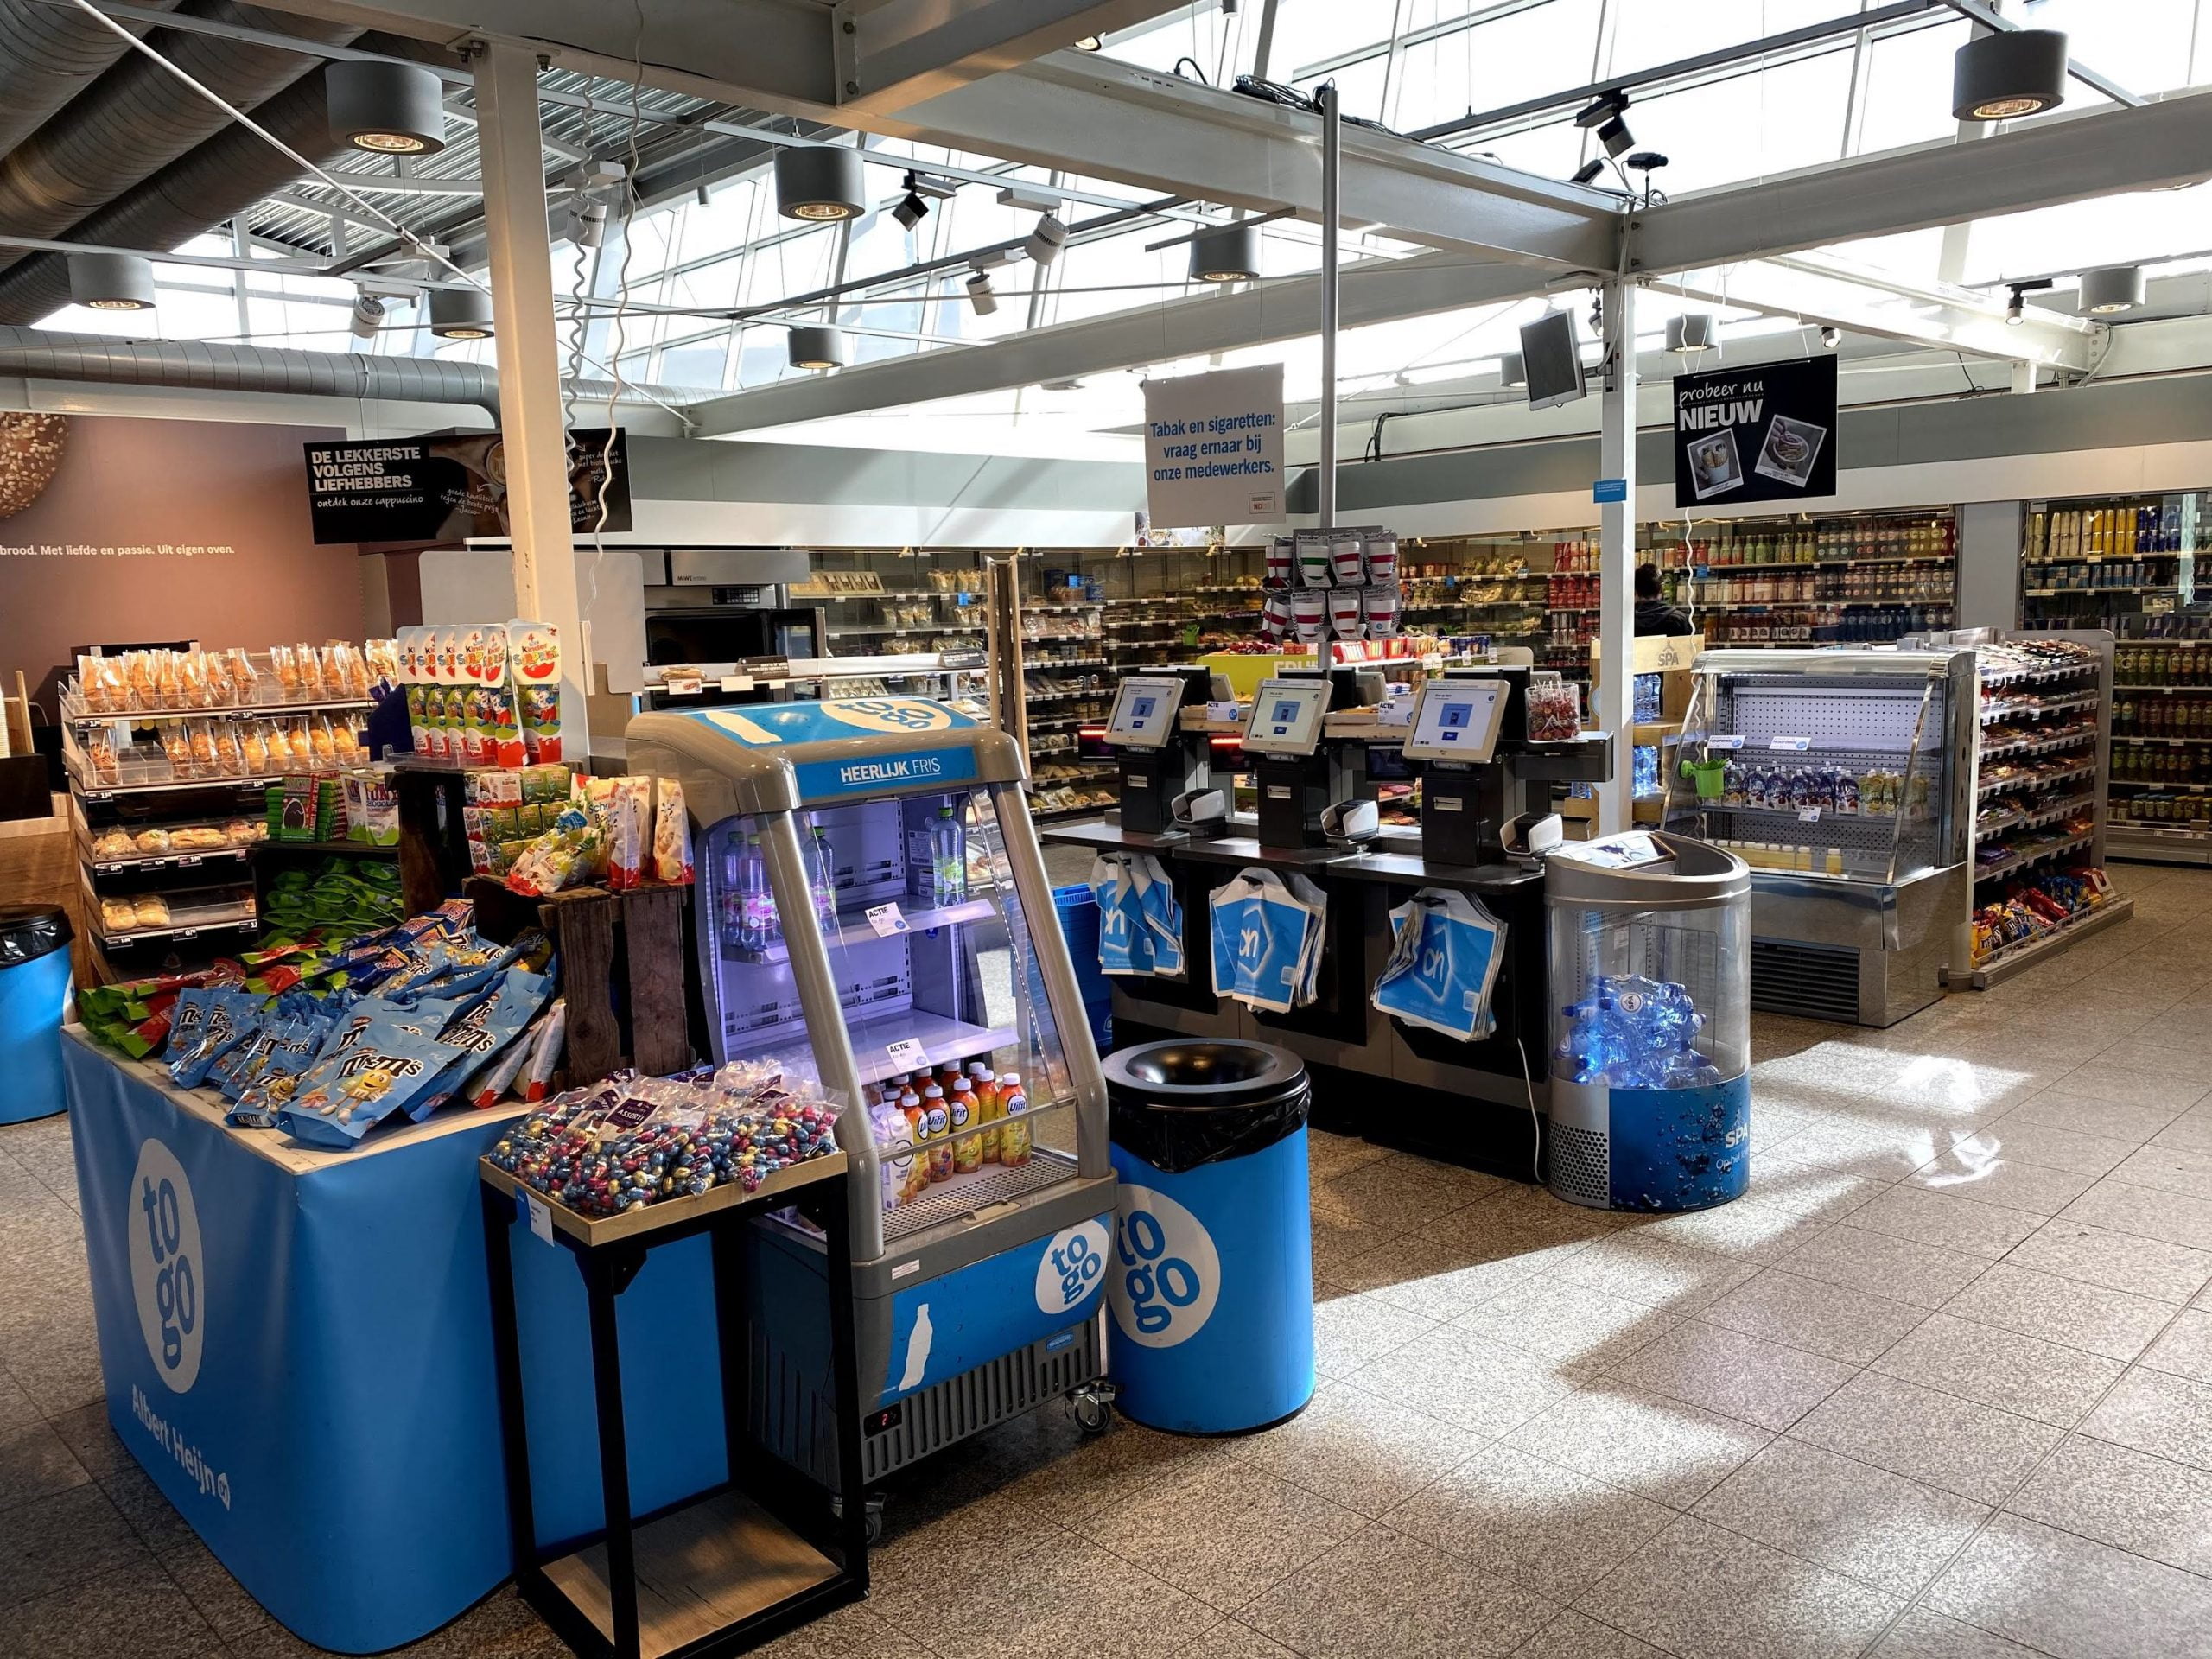 Even the supermarket at Eindhoven Airport is deserted…